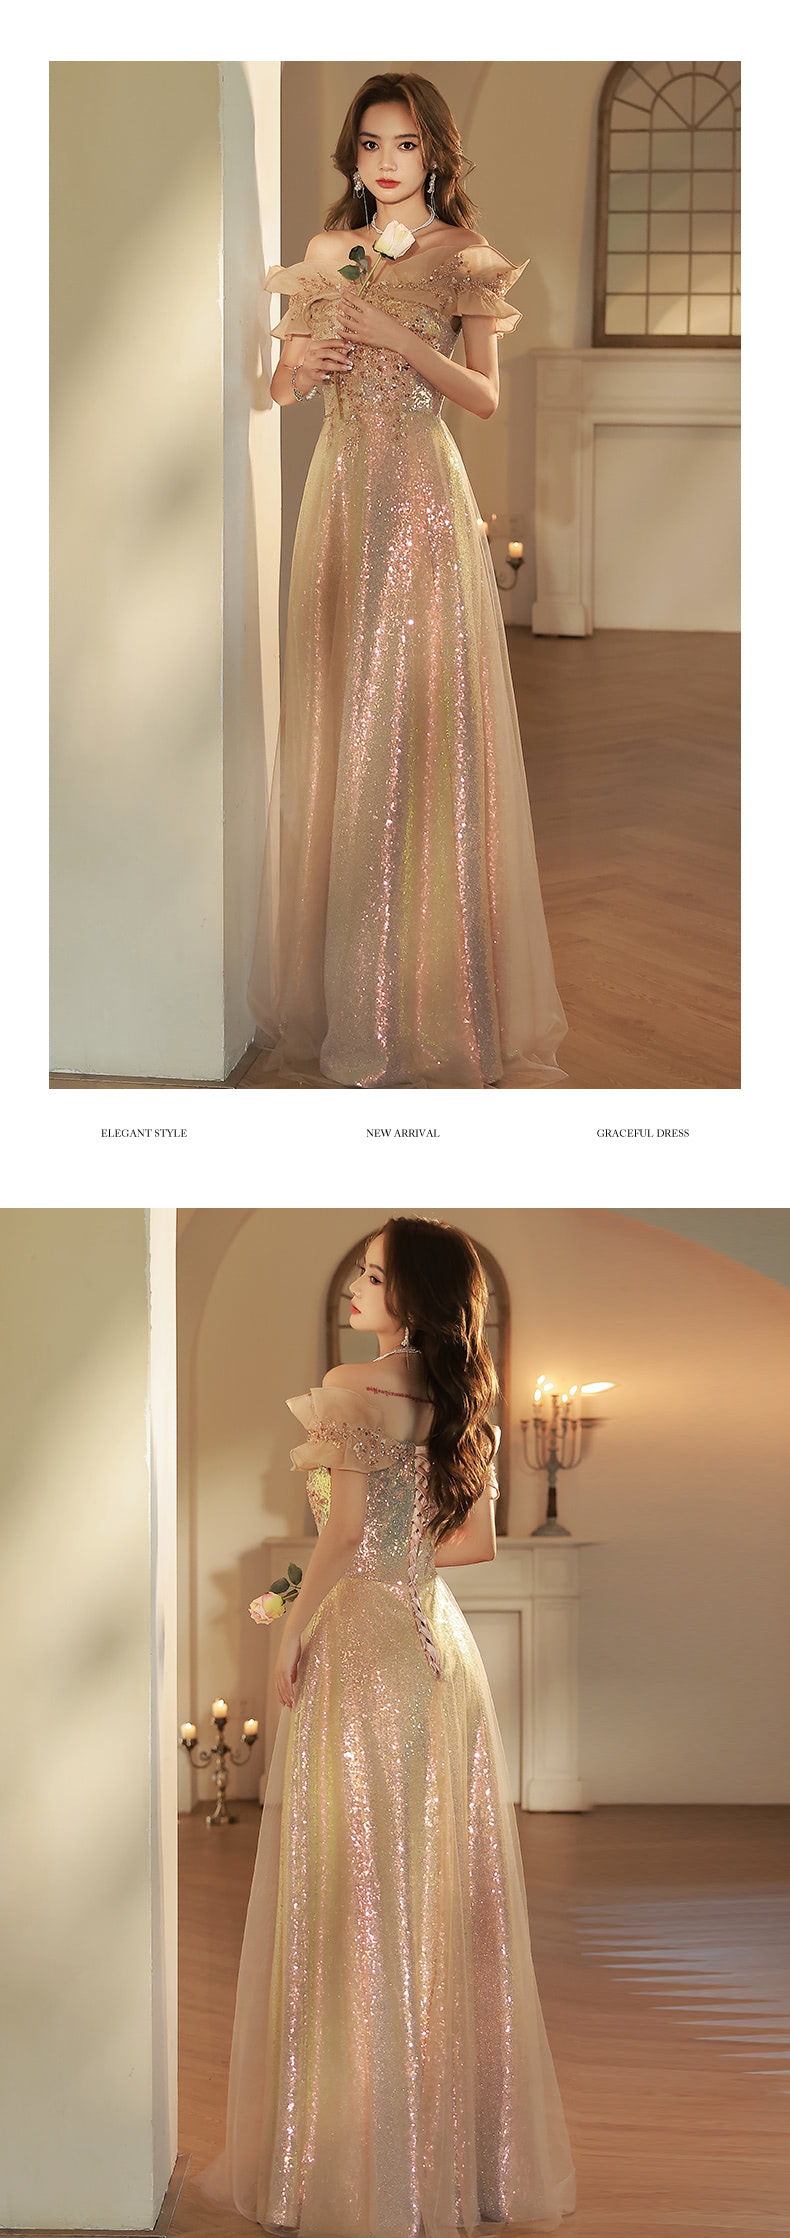 Luxury-Off-Shoulder-Sequin-Glitter-Sparkly-Long-Evening-Party-Dress13.jpg